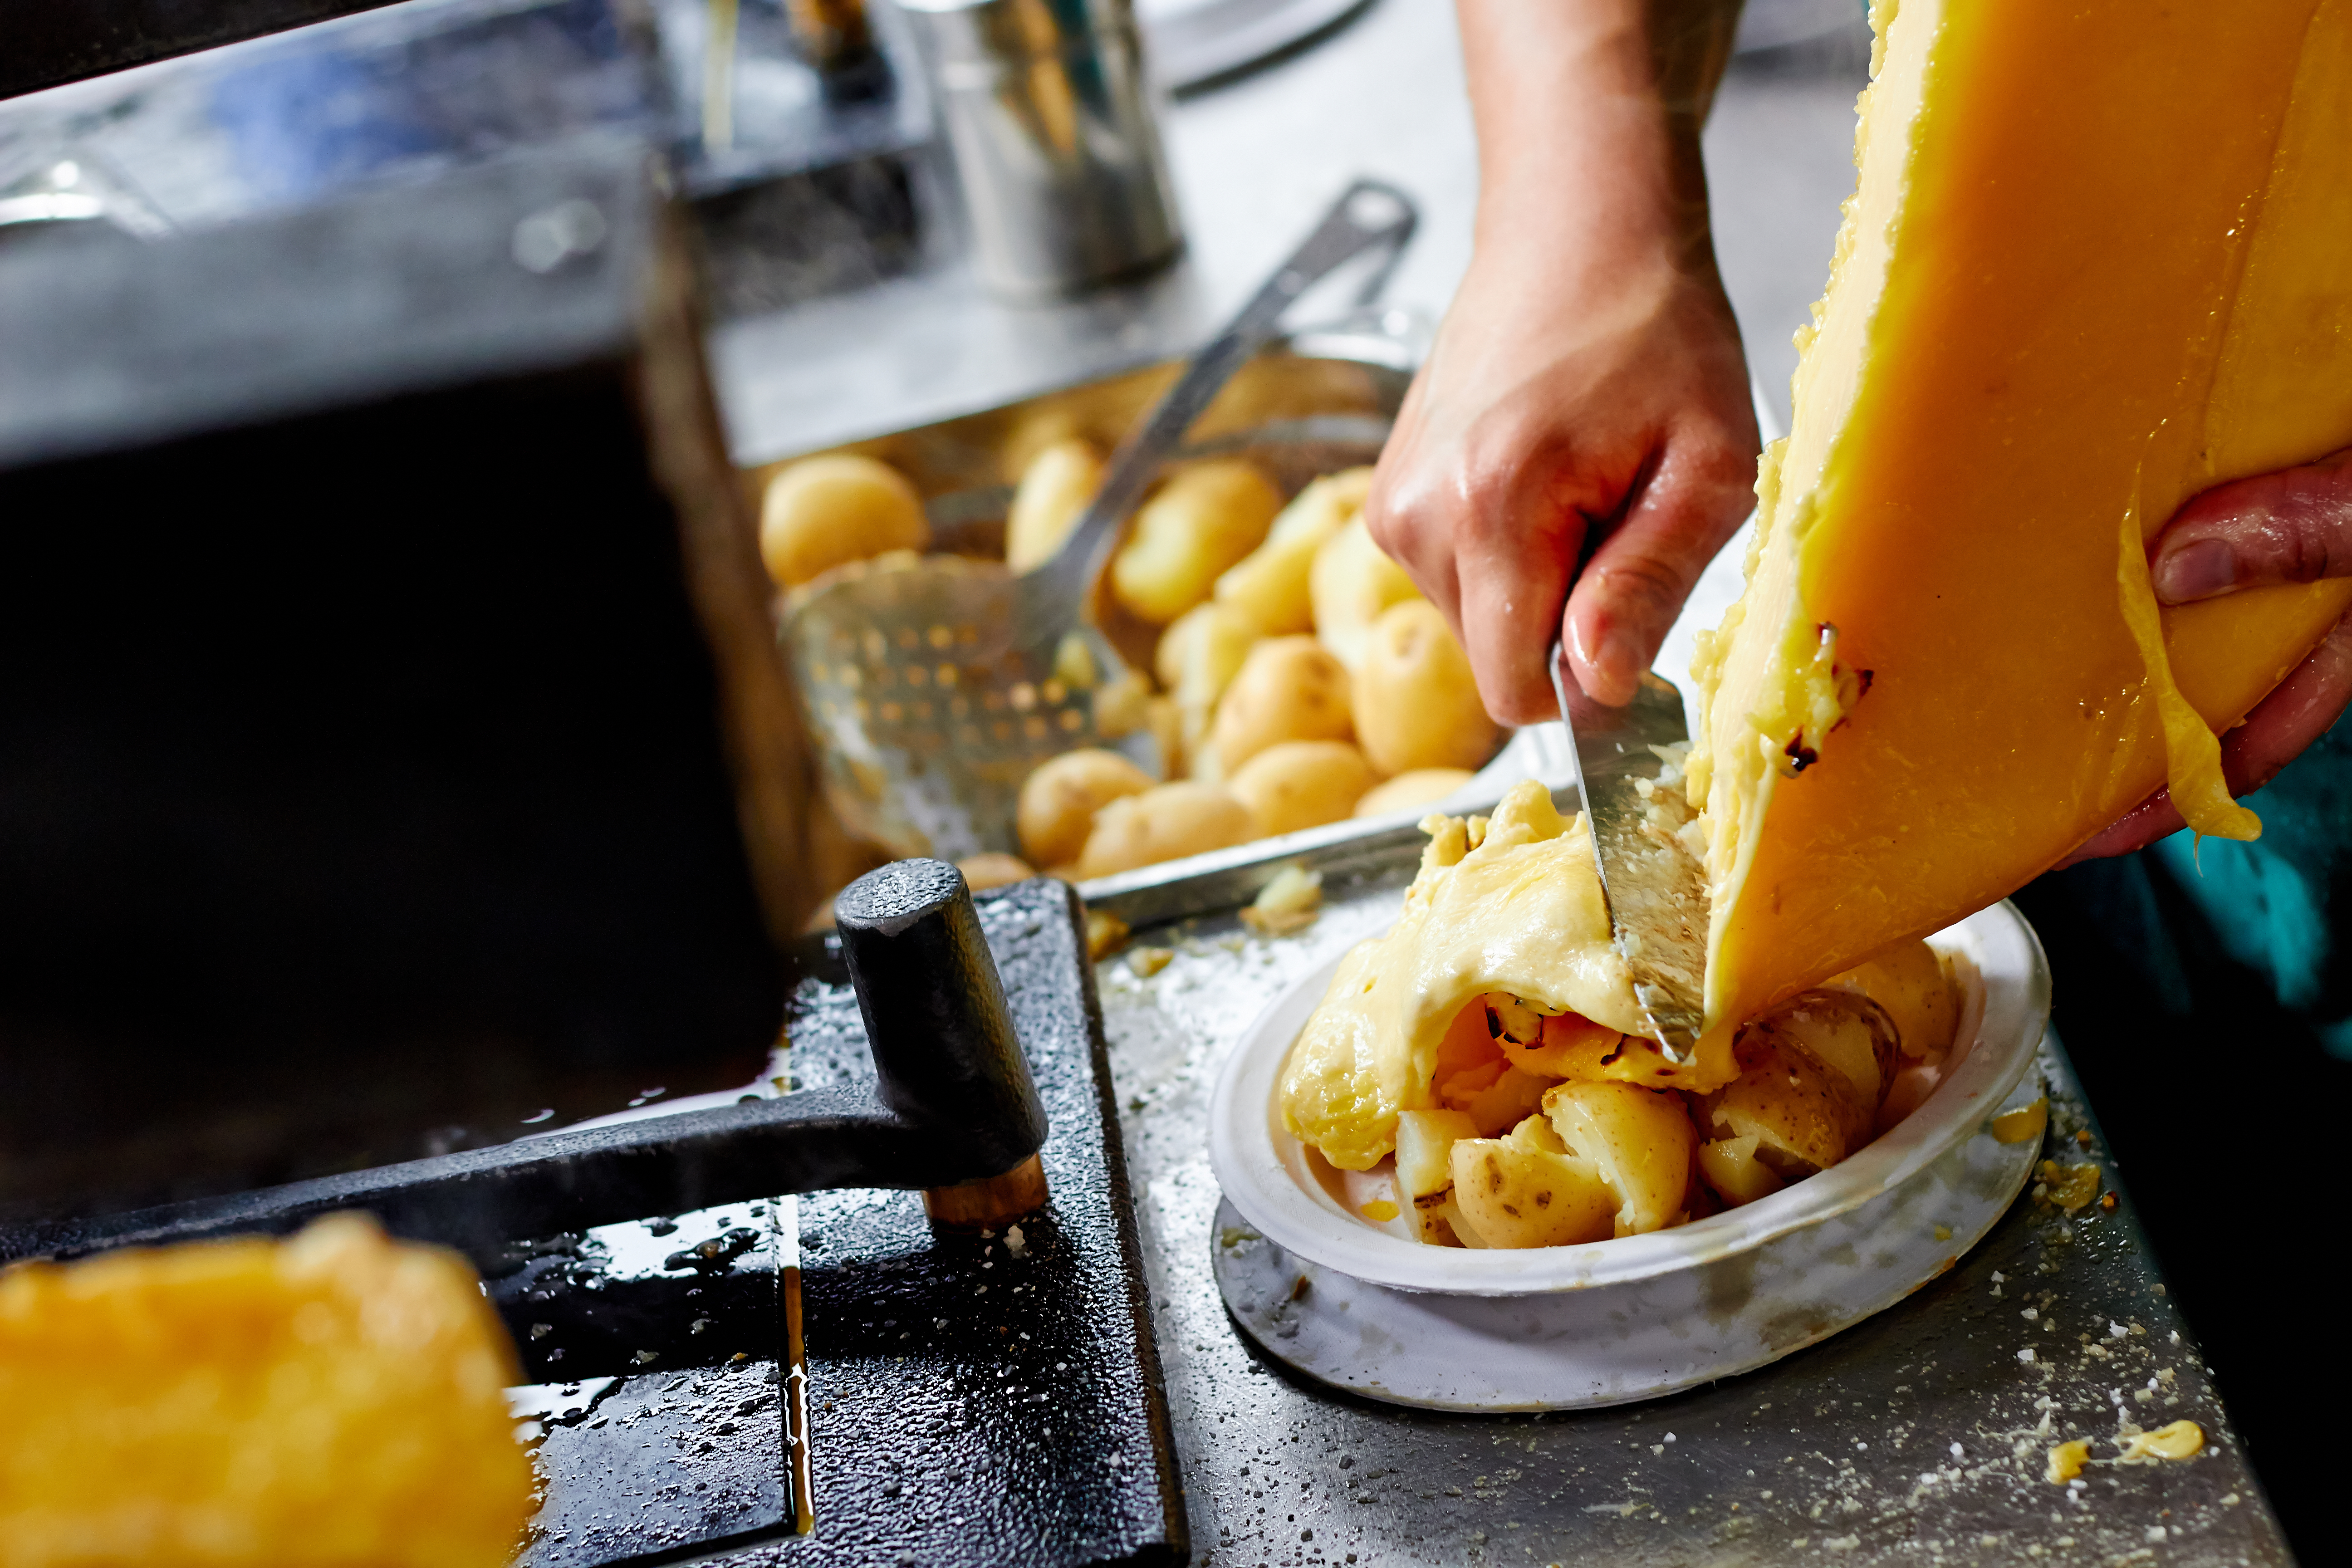 Raclette cheese scraped on top of potatoes at a London restaurant